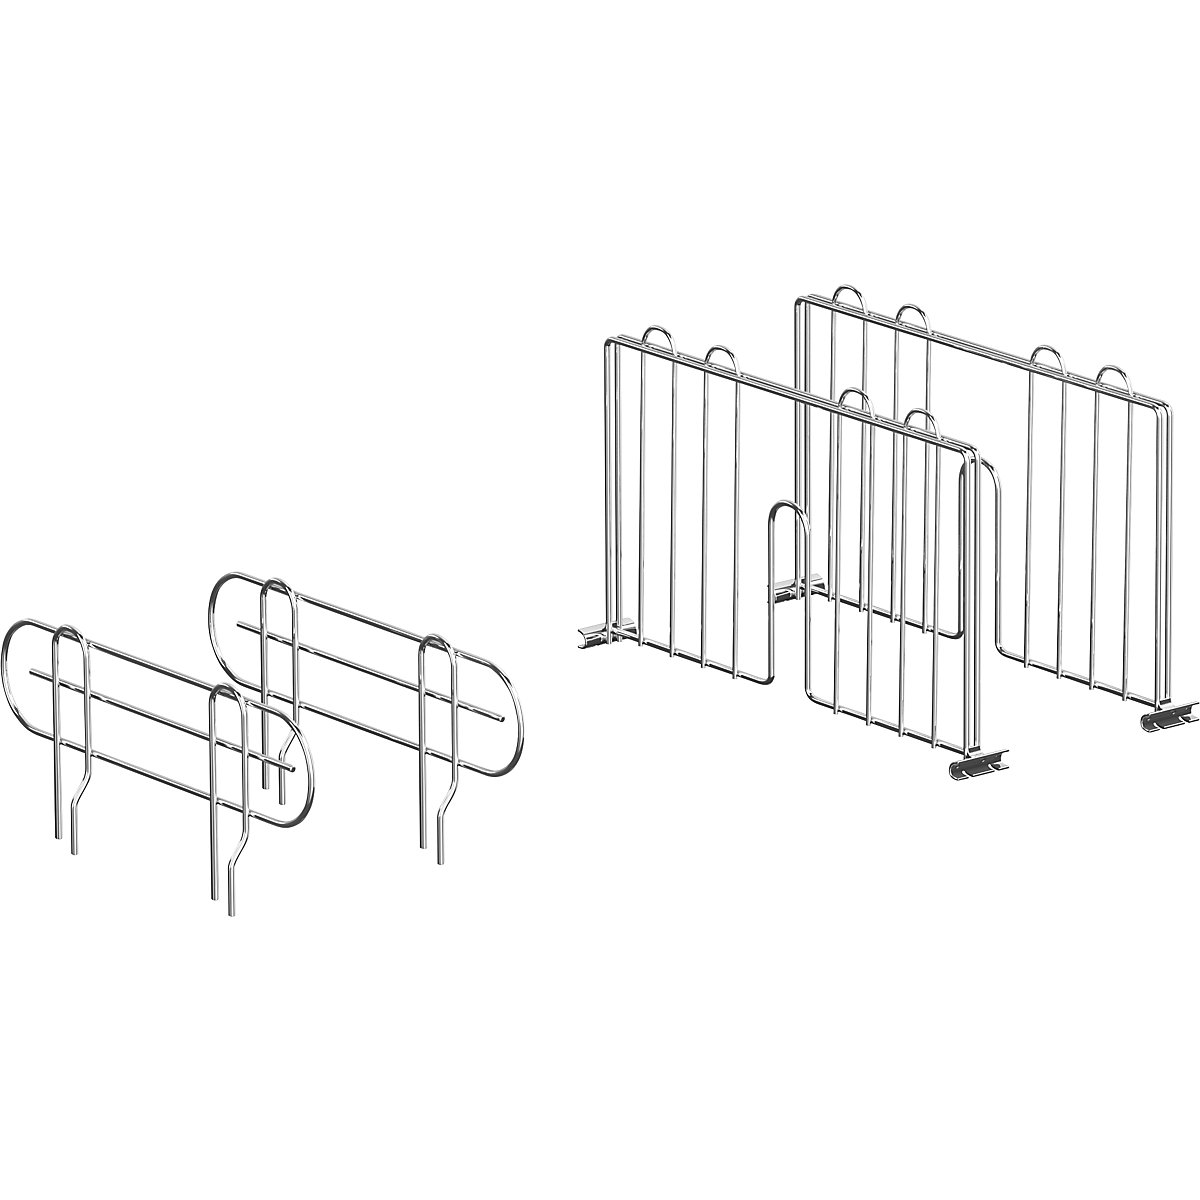 Set of shelf dividers and lateral stops